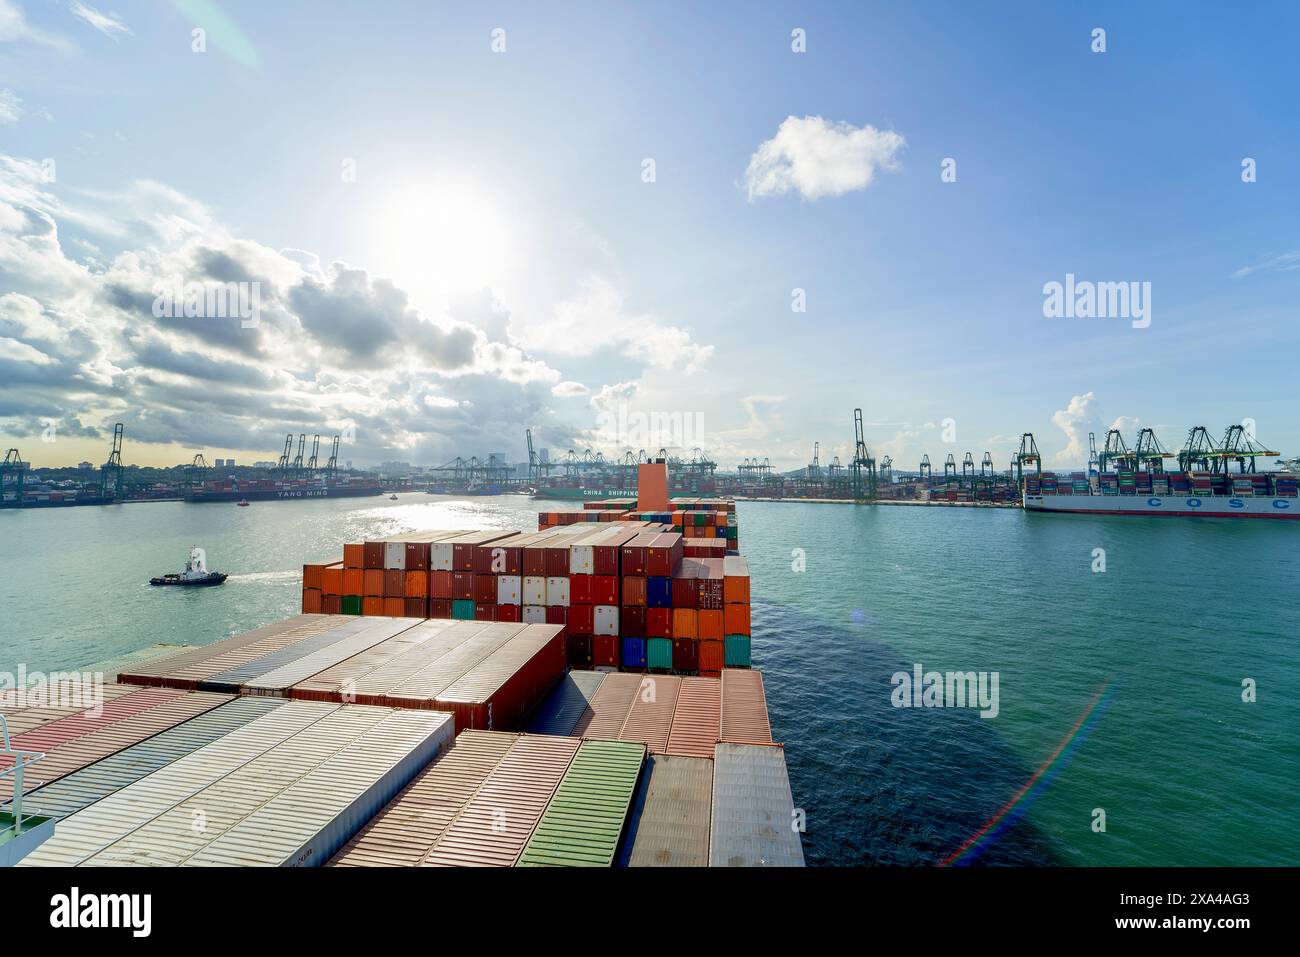 A cargo ship is laden with colorful containers under a partly cloudy sky, sailing near a busy port with numerous cranes and shipping infrastructure. Stock Photo